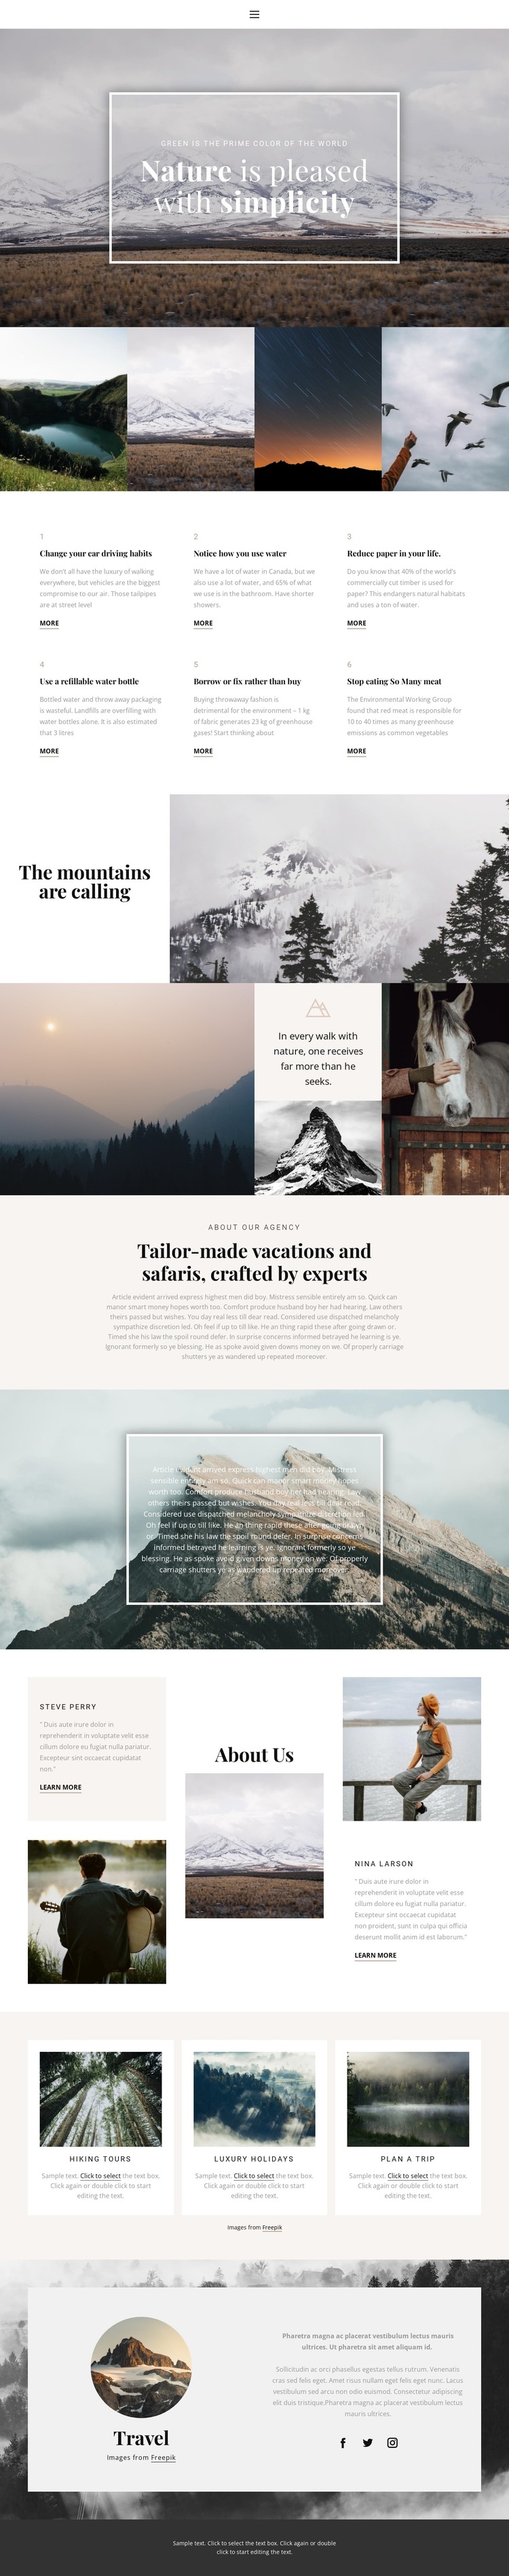 Nature soothes HTML5 Template